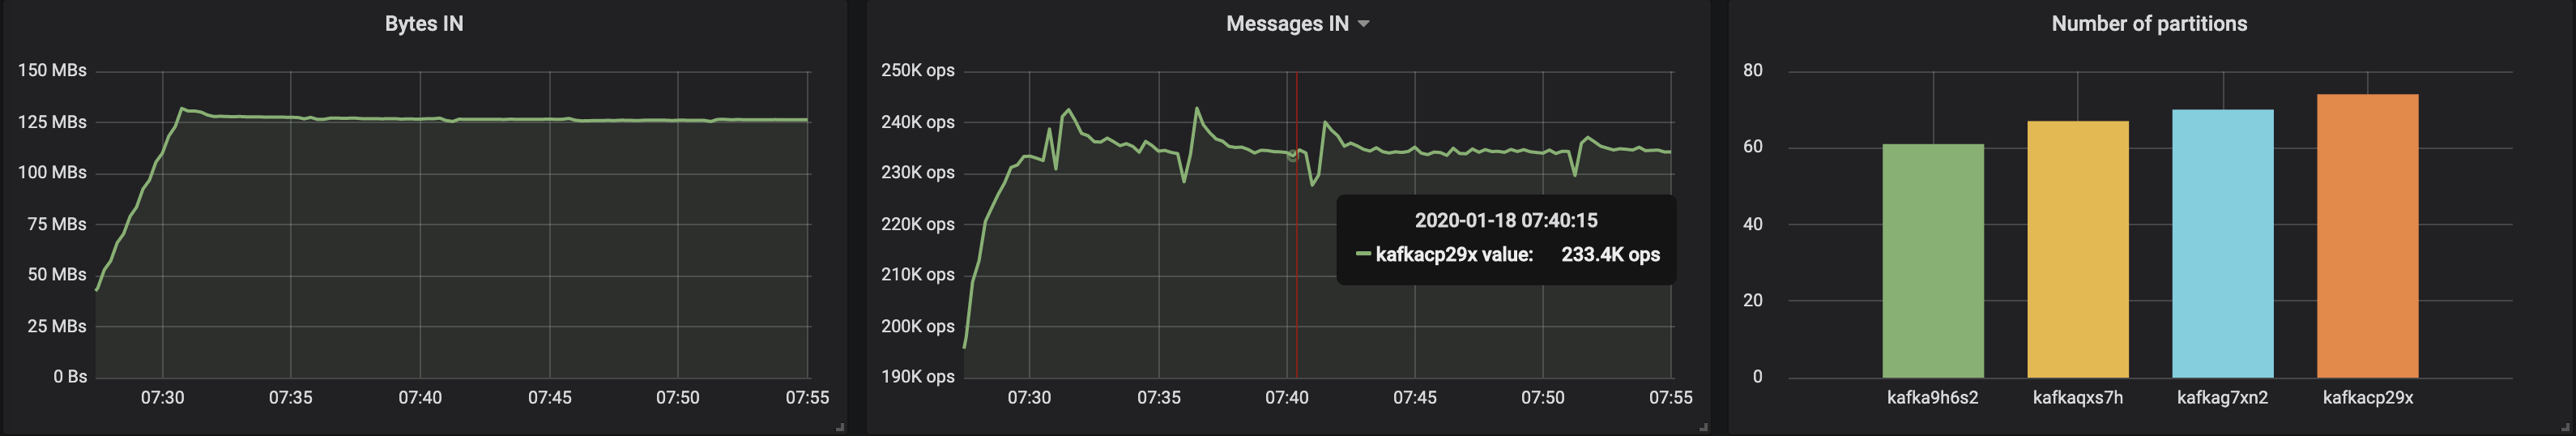 kafkacp29x messages in